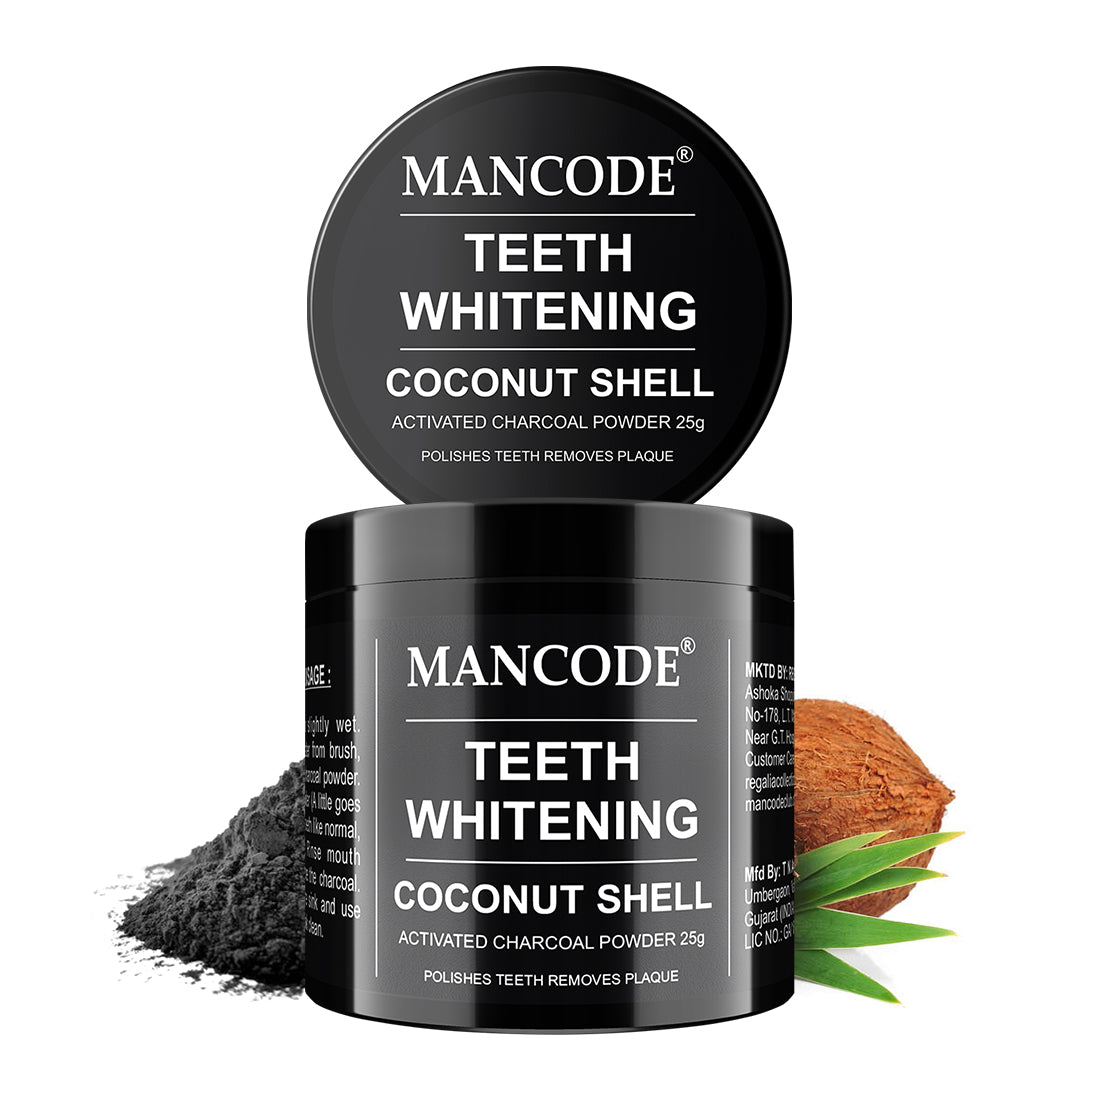 Coconut Shell Activated Charcoal Powder for Teeth Whitening